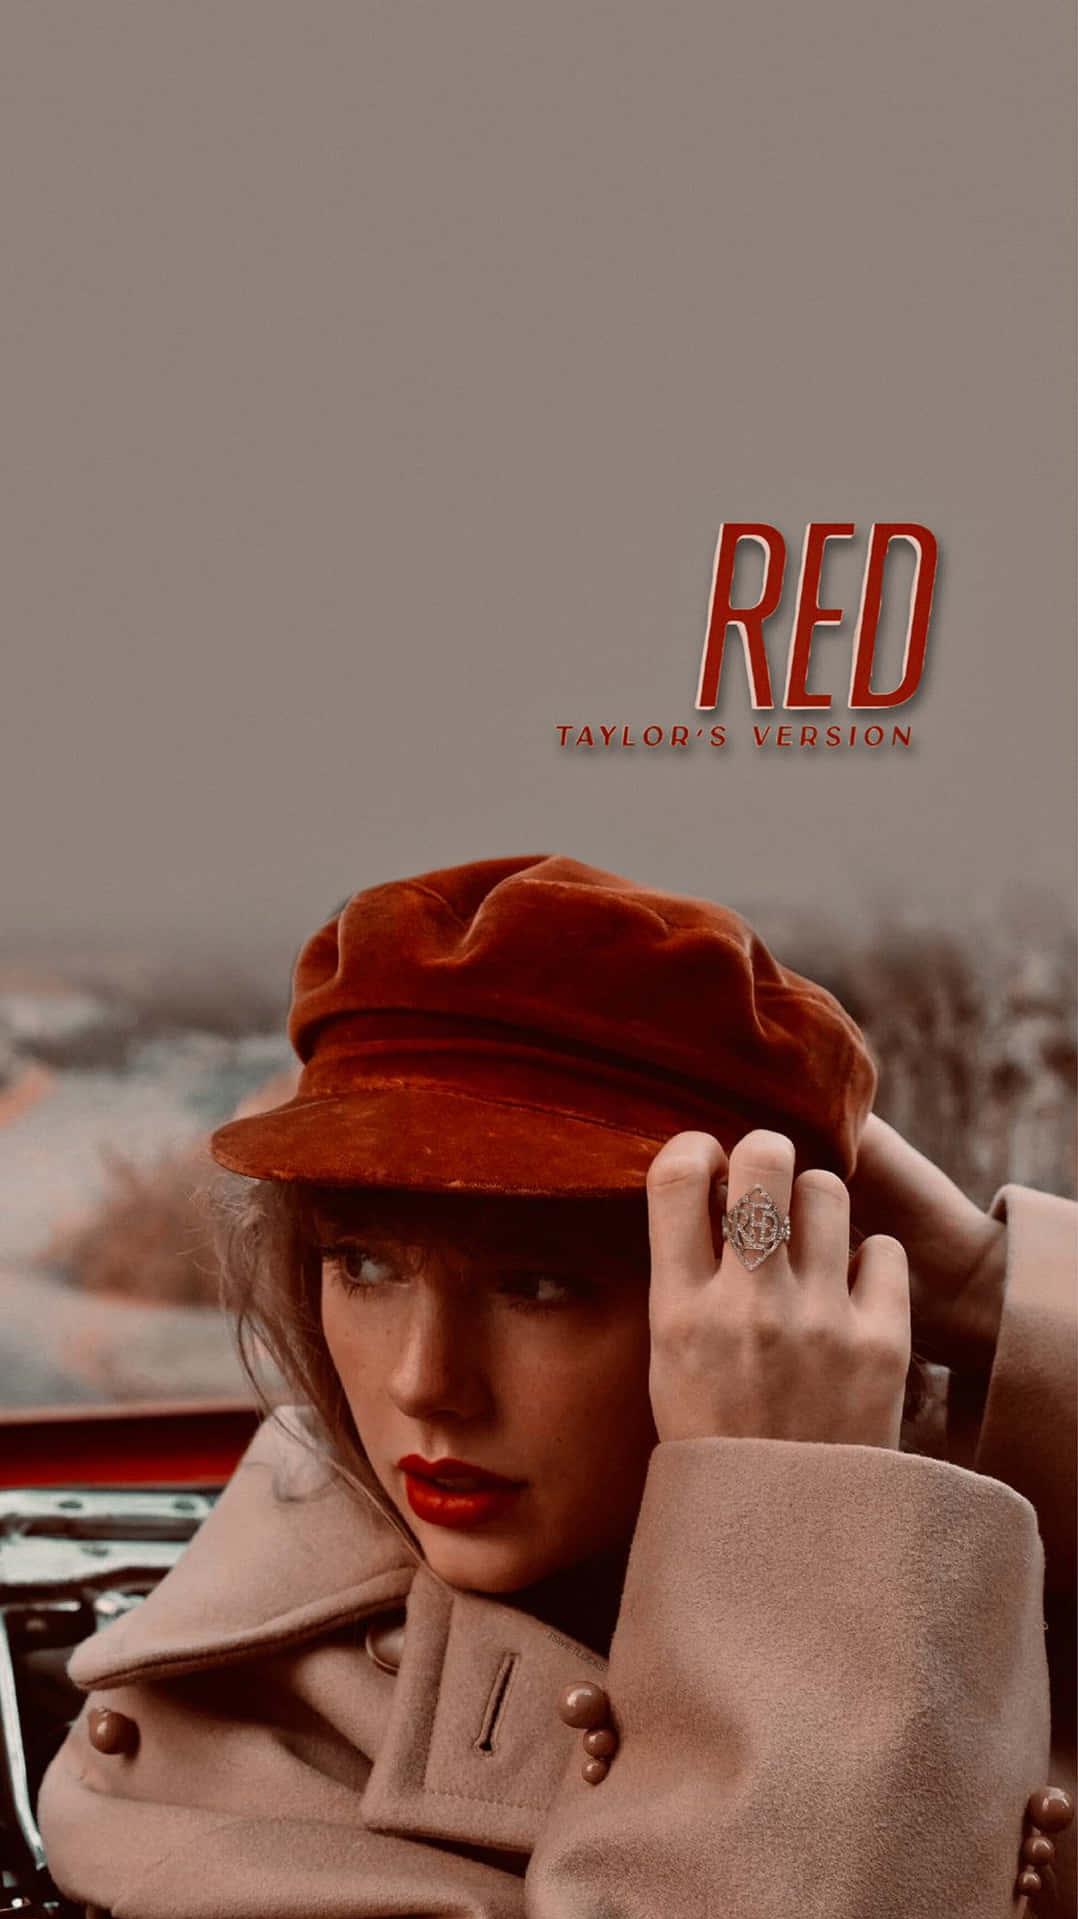 Red Taylor S Version The Redesigned Swift Album